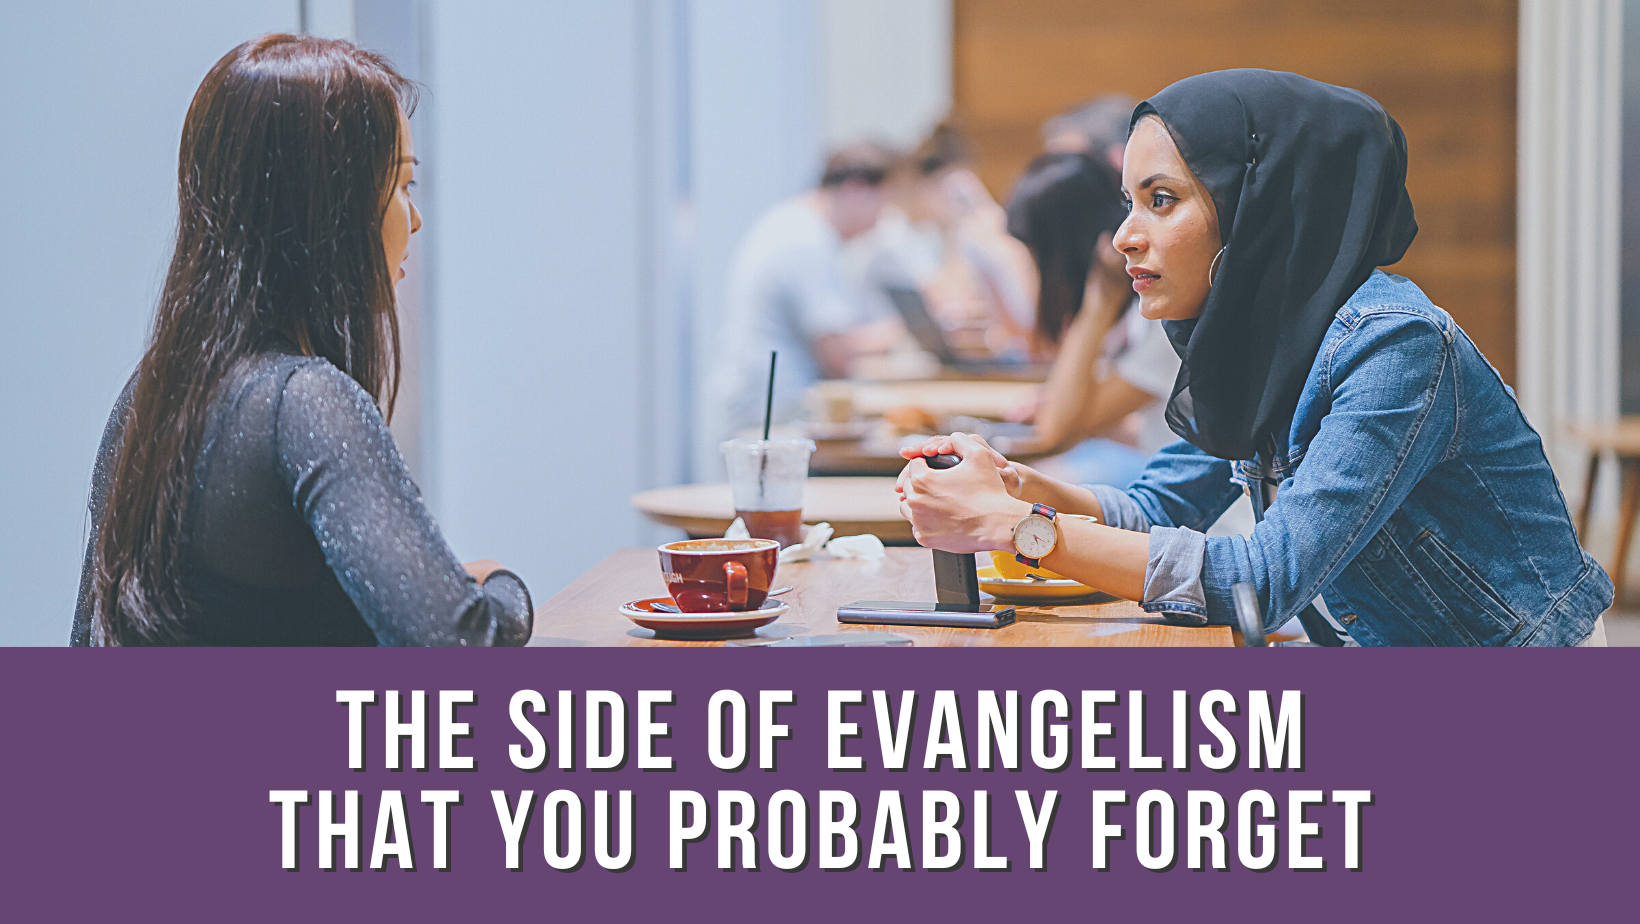 The side of evangelism that you probably forget